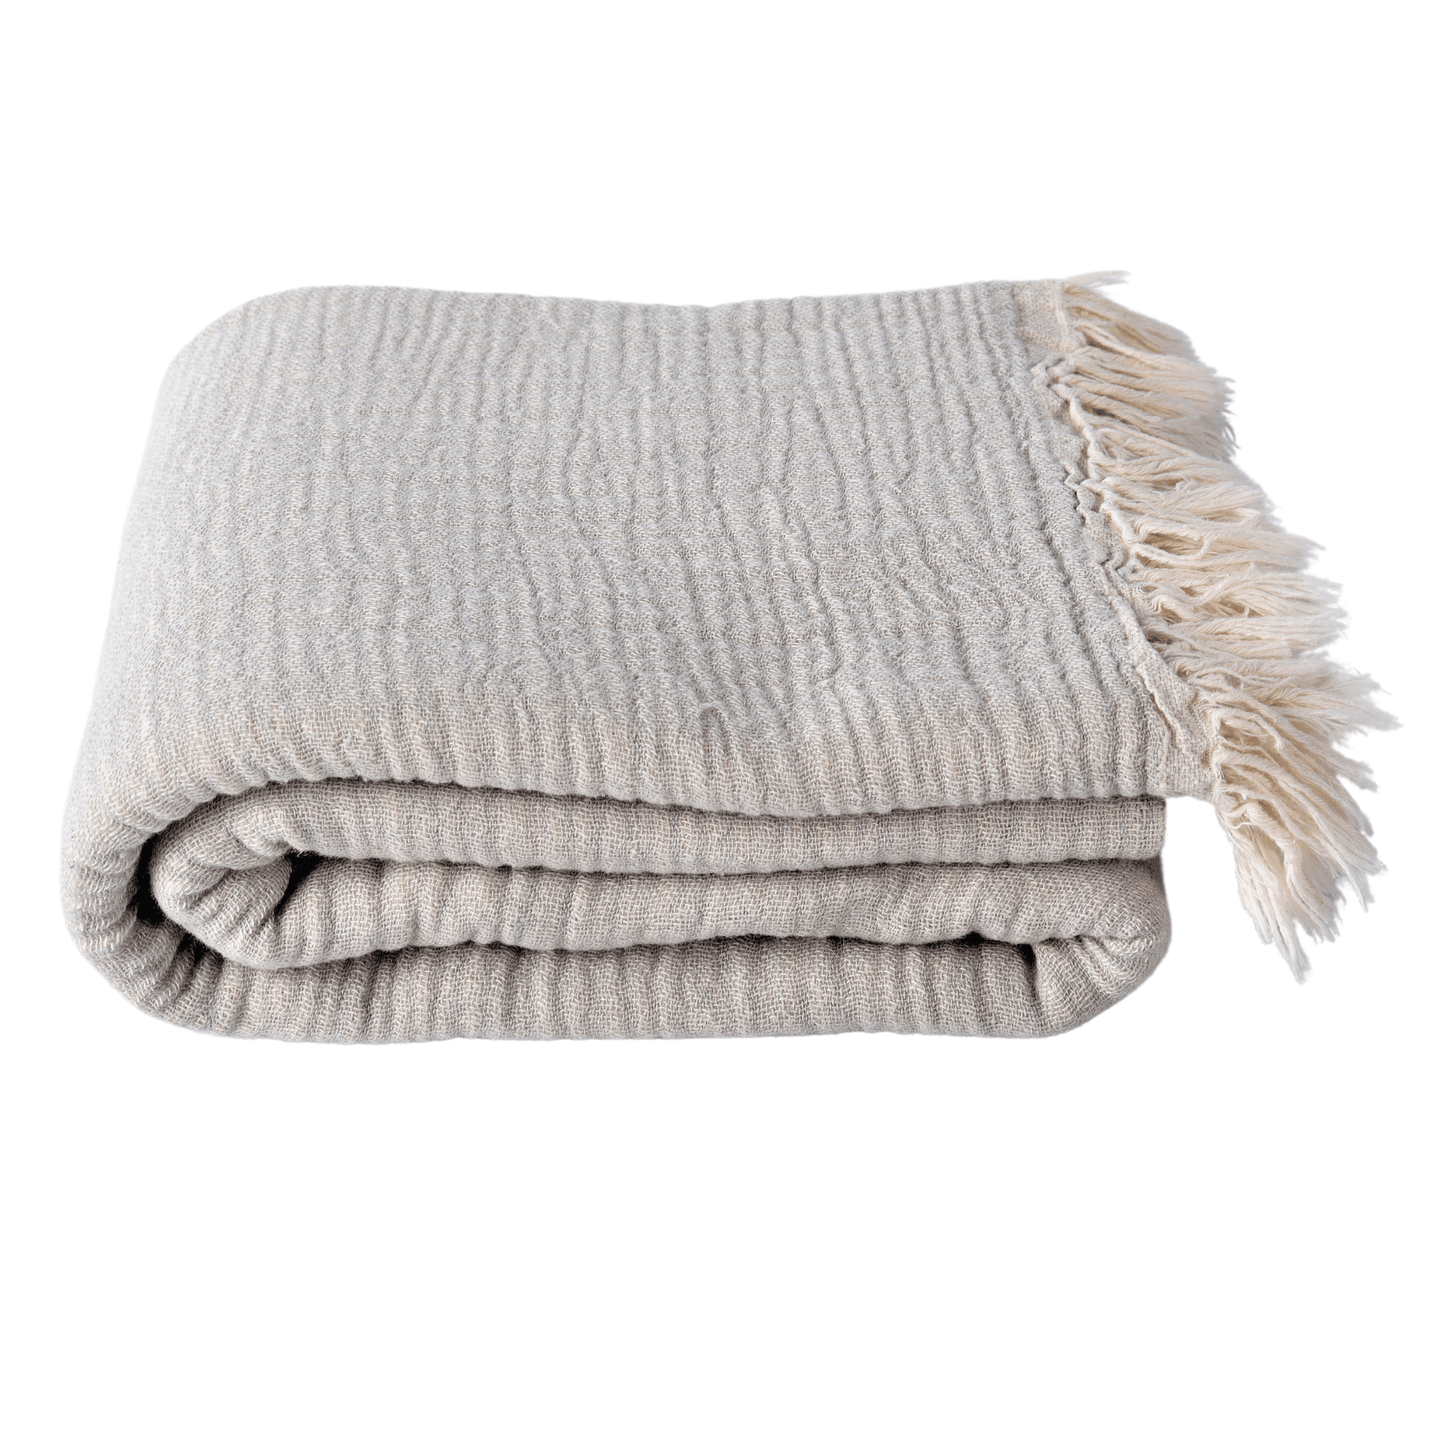 Muslin Towels for Adults light gray